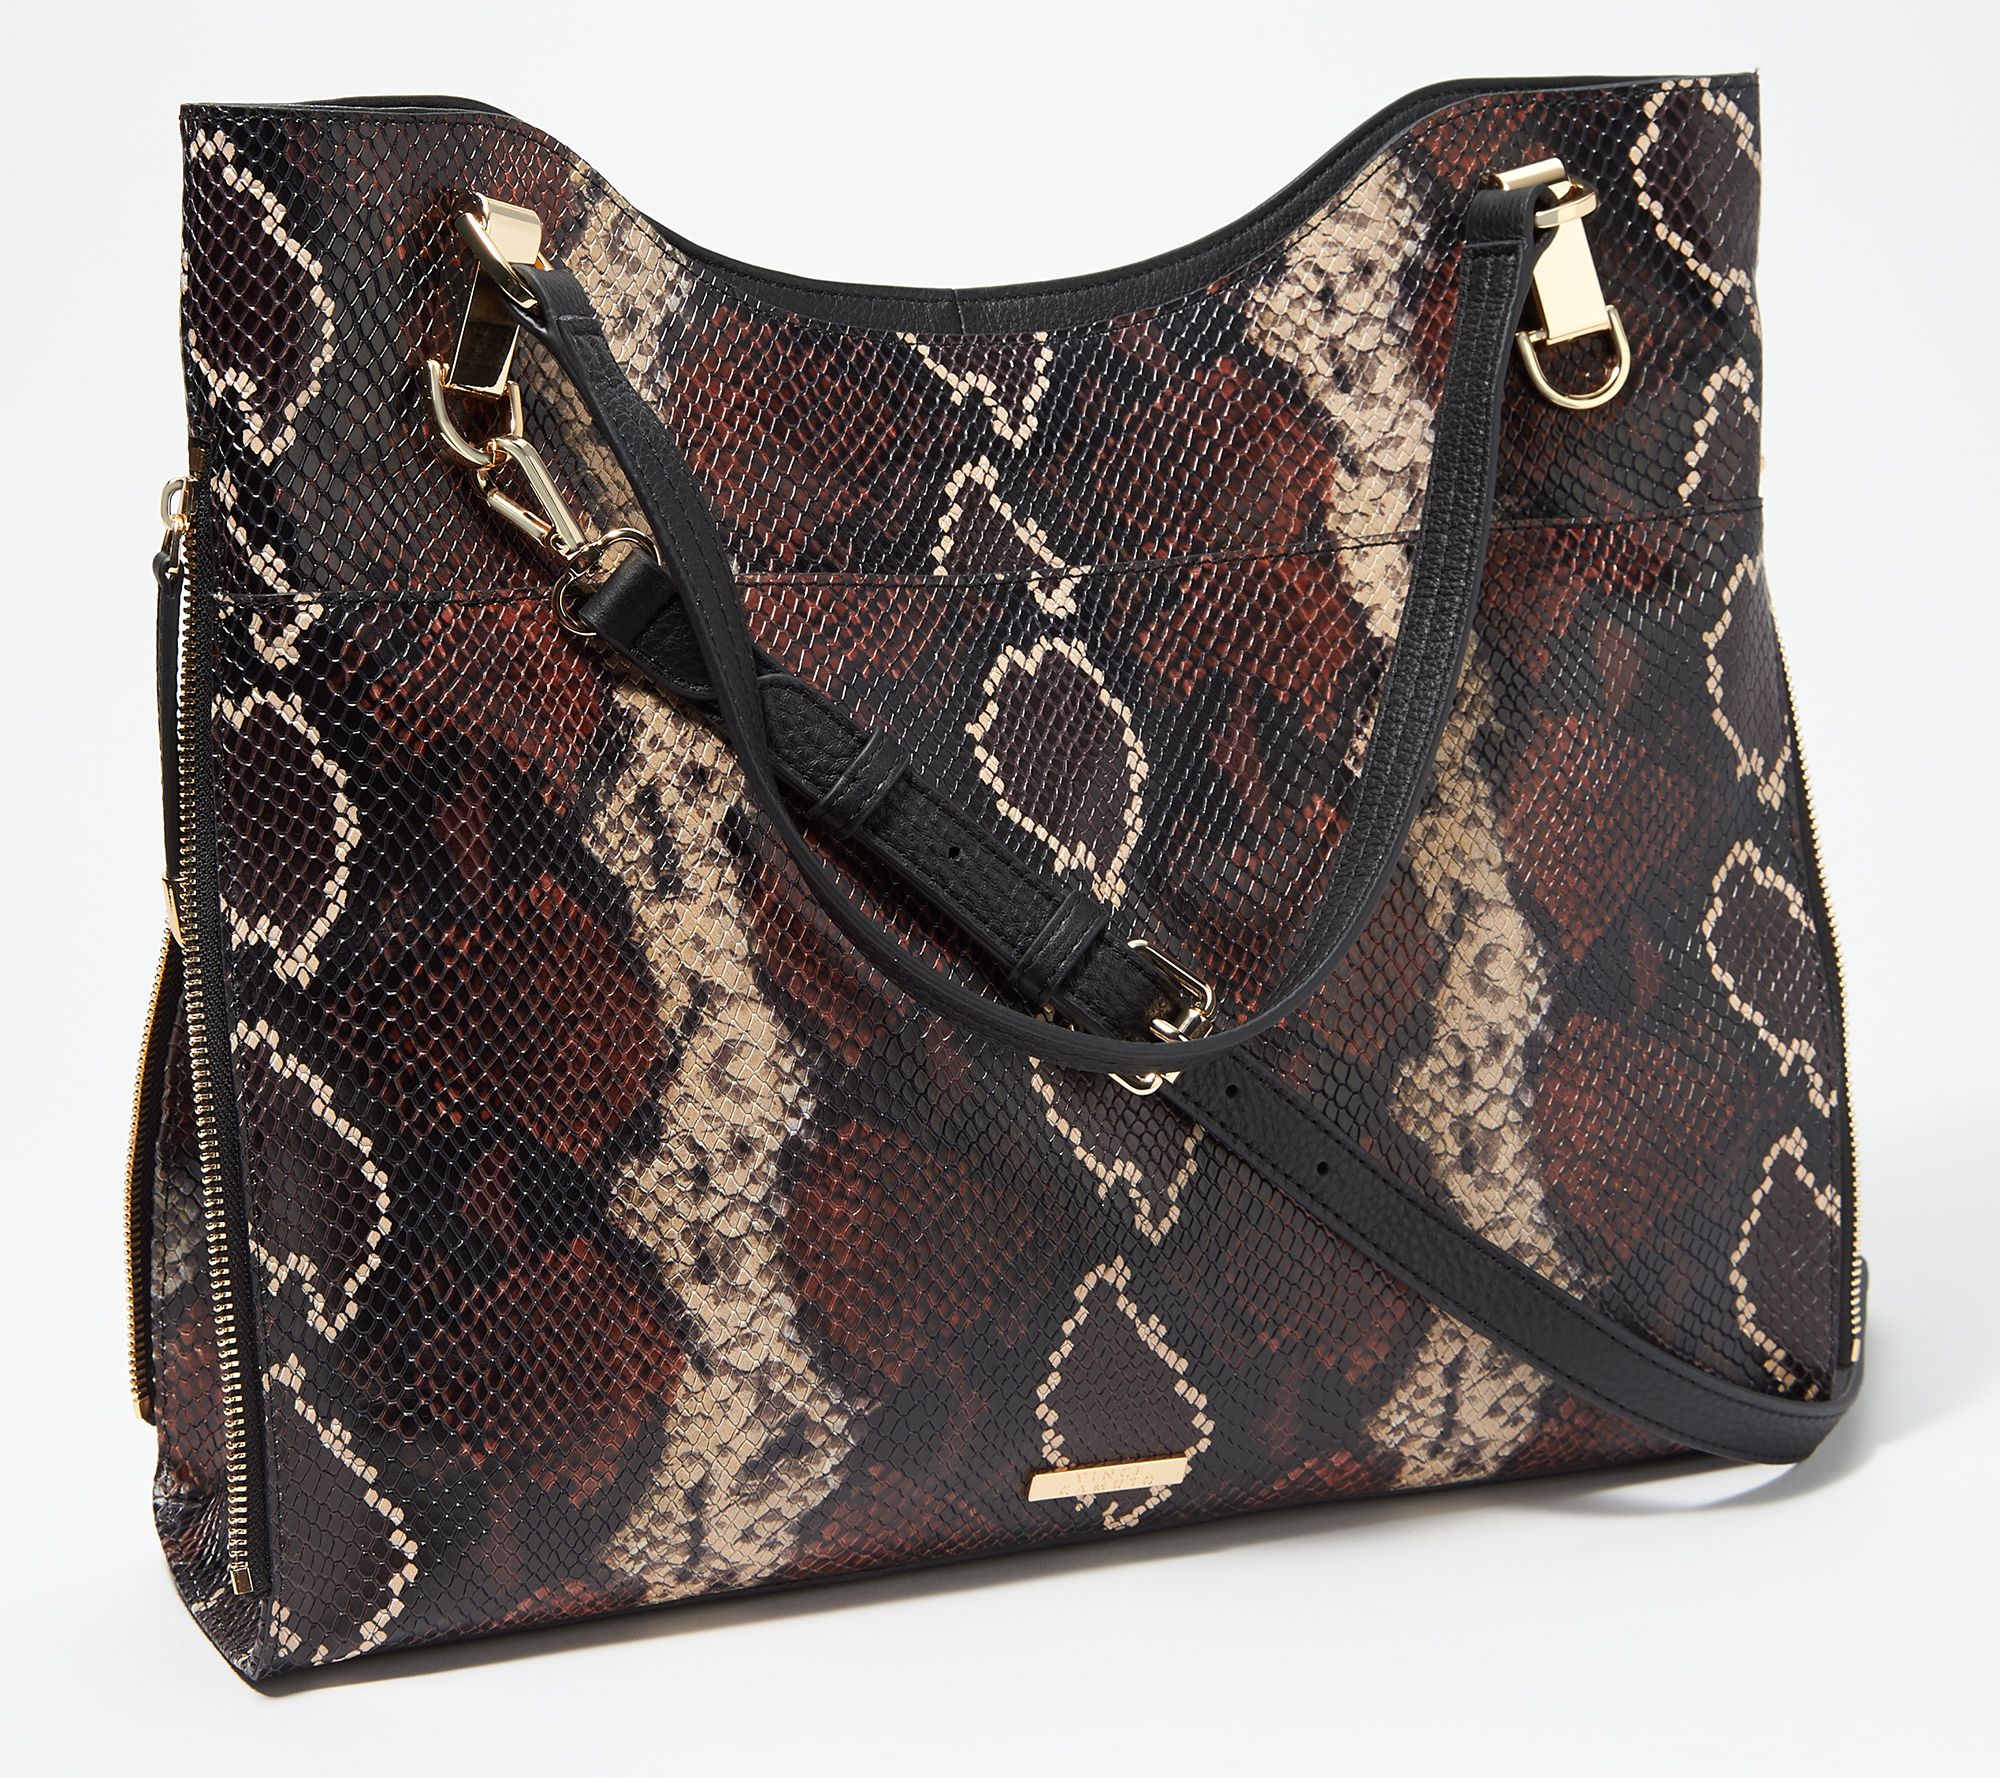 NEW Textured Python Faux Snake Skin Crossbody Purse Touch Screen Cell Phone Bag